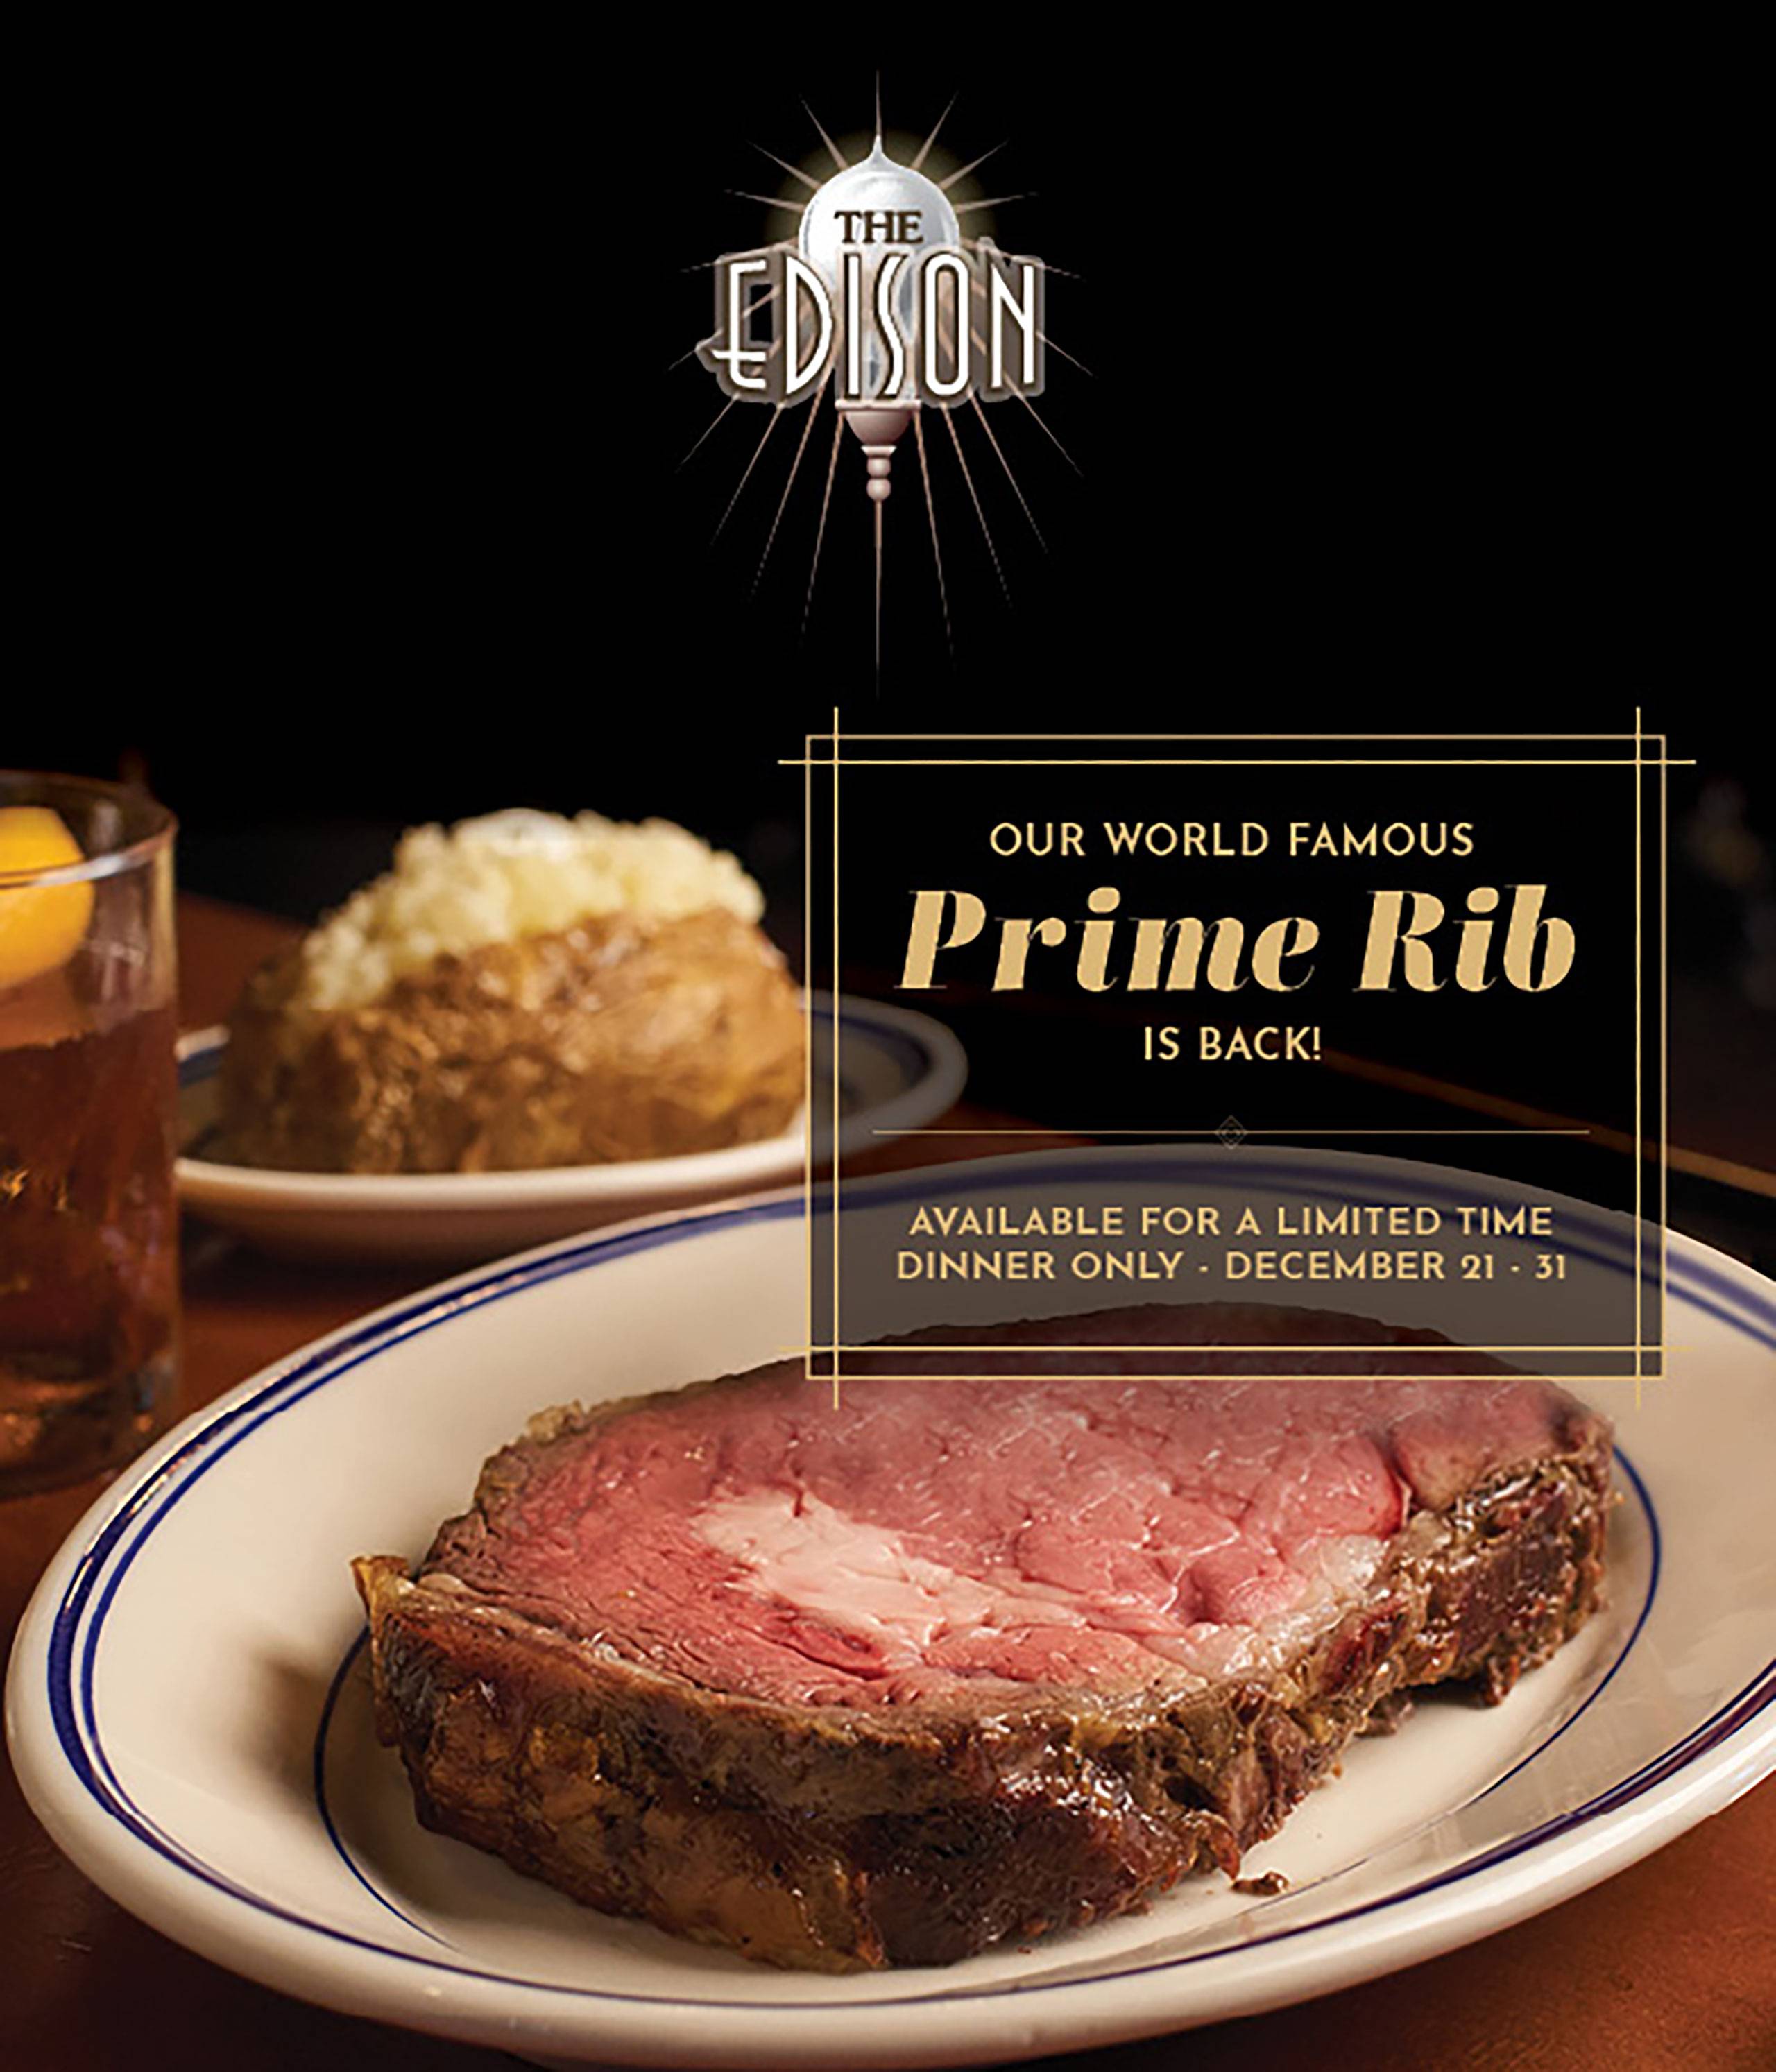 The Edison's famous Prime Rib makes a holiday comeback at Disney Springs